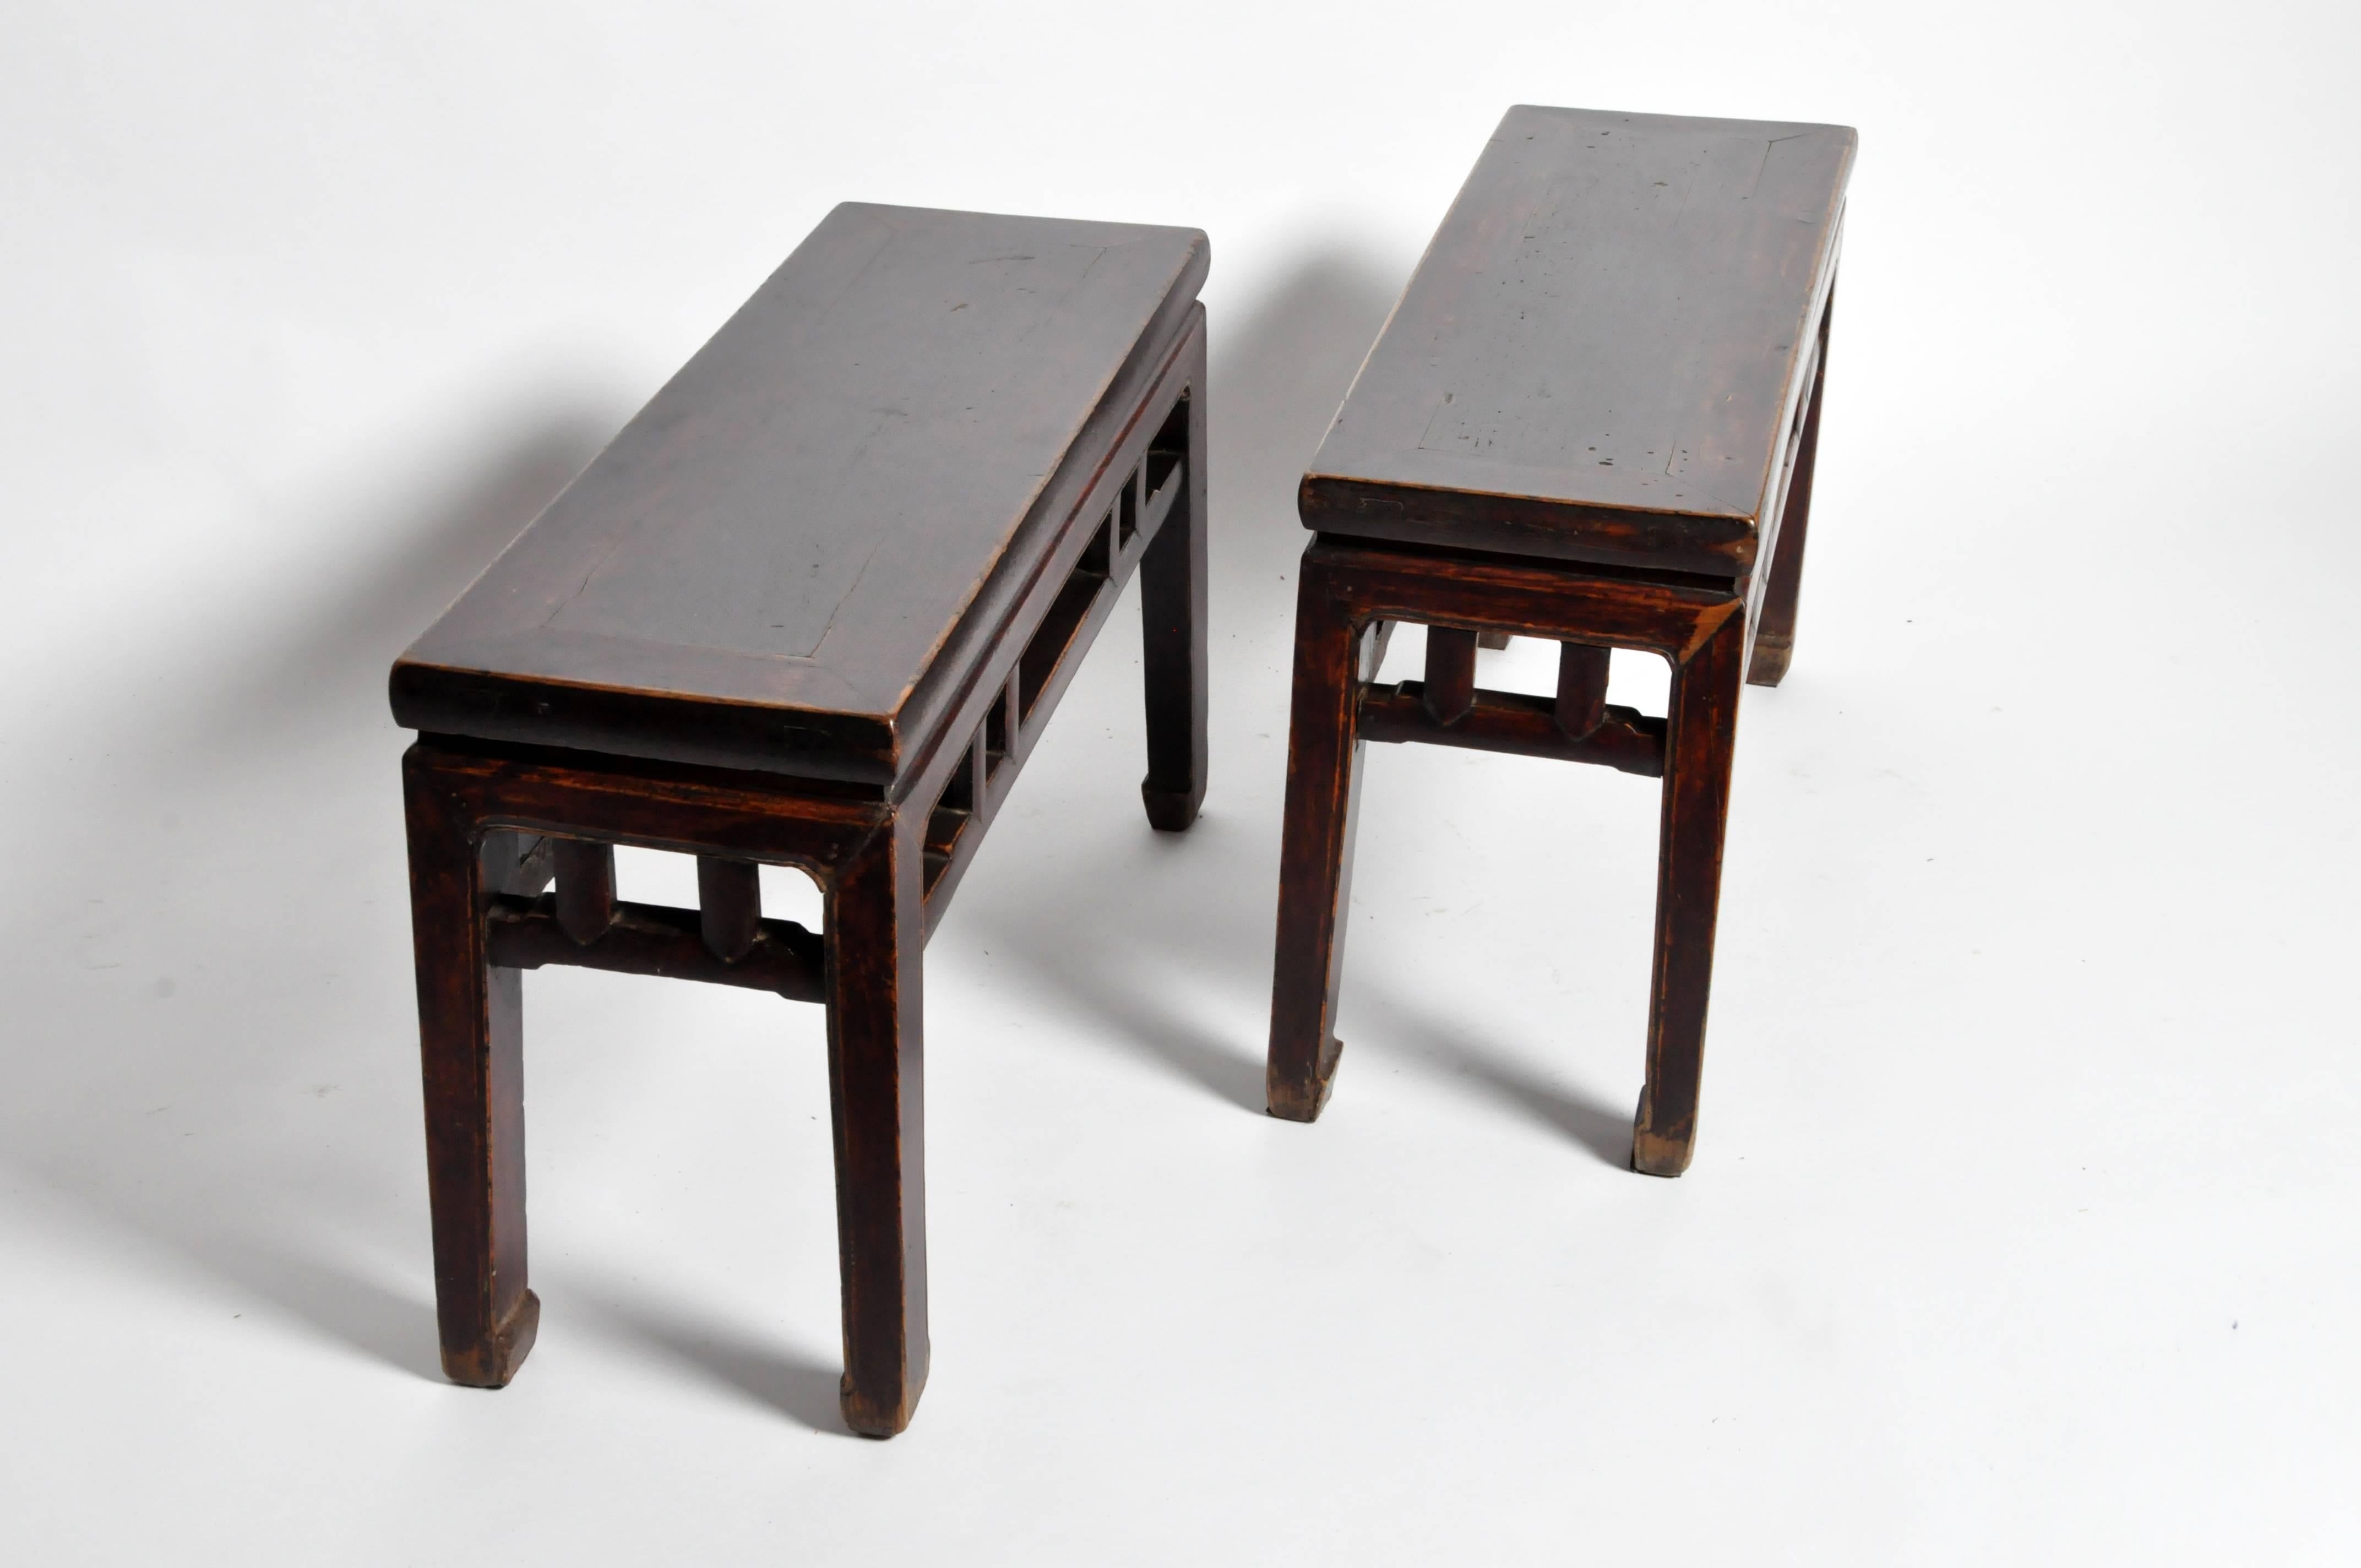 These Qing dynasty rectangular Chinese benches are from Shanxi, China and are made from Walnut. They feature horse hoof legs and original lacquer.